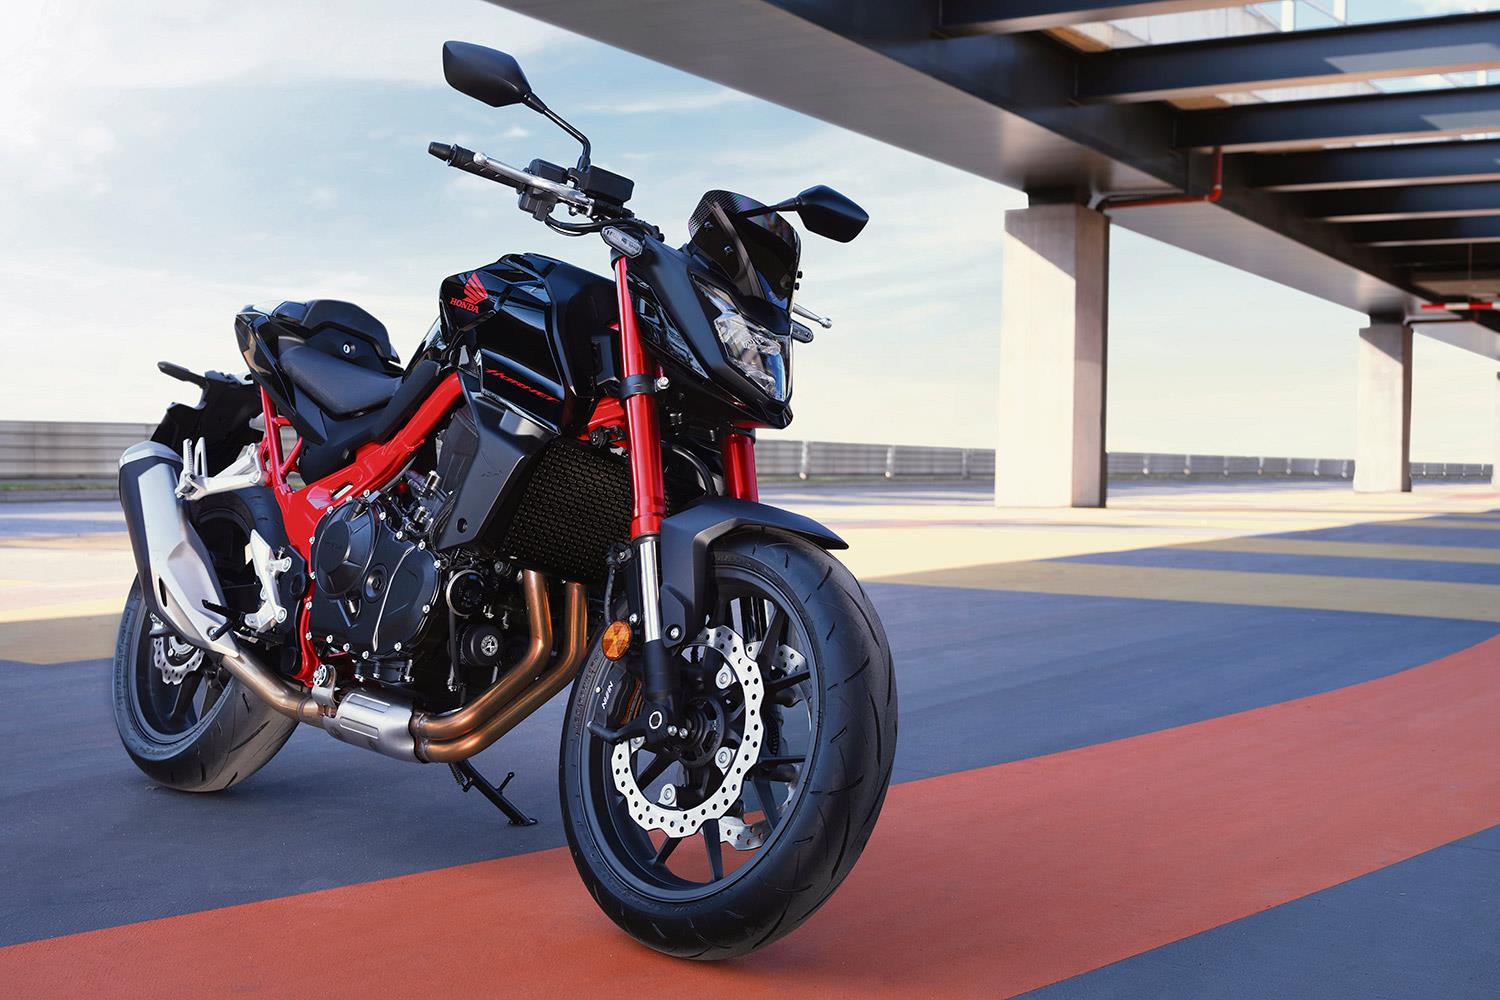 Back with a buzz! Honda’s legendary name returns in new 750